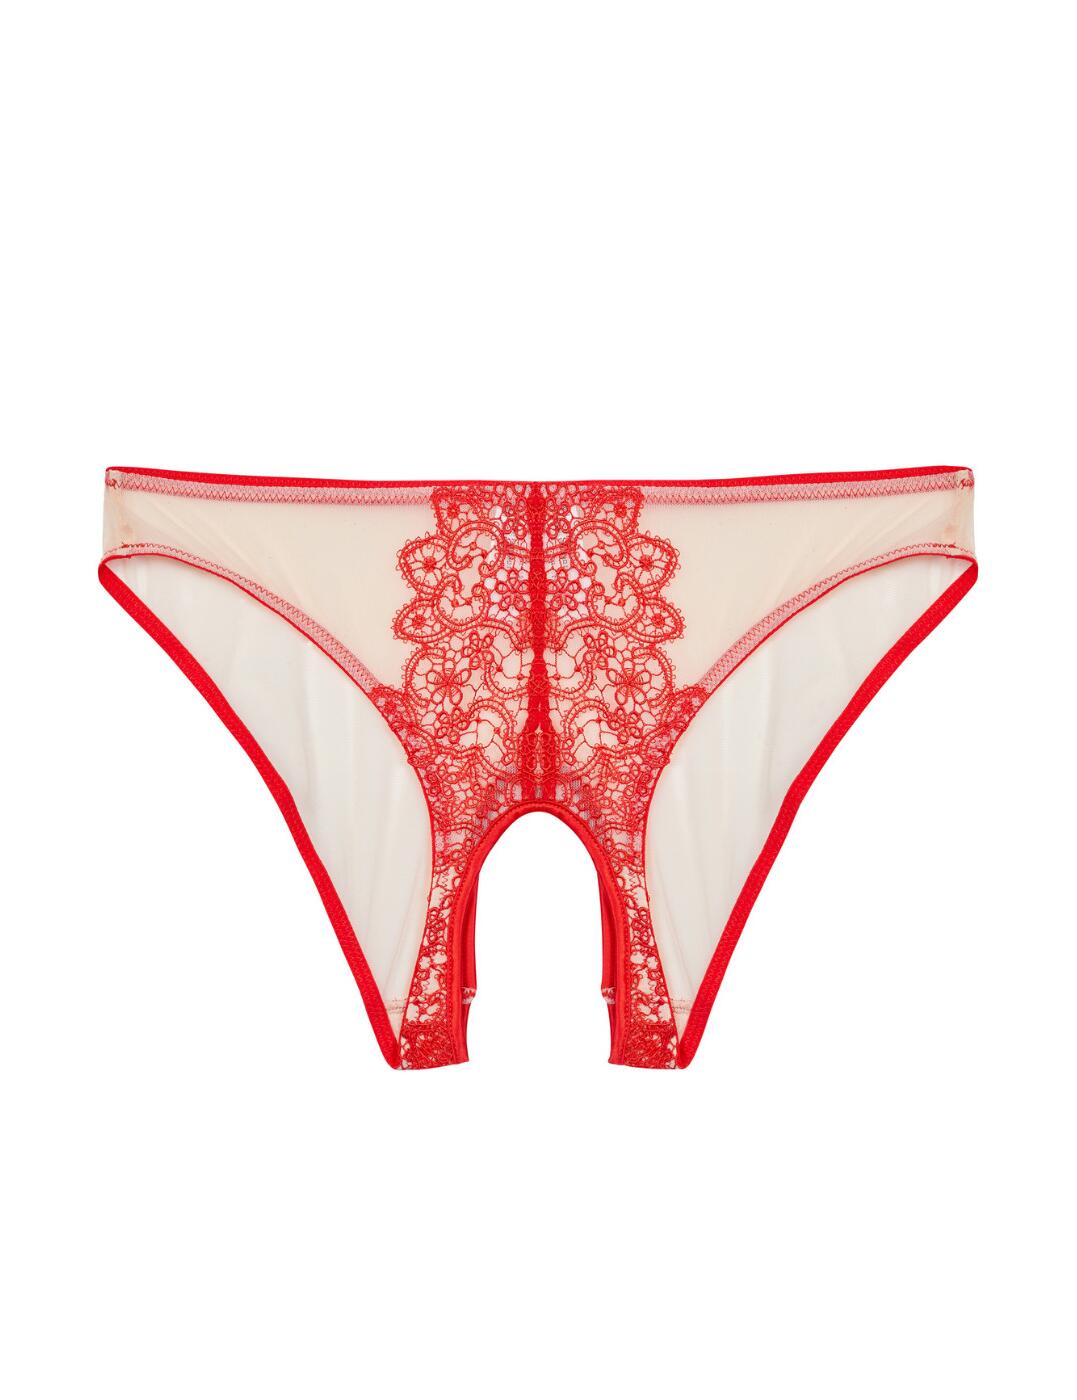 Playful Promises Anaise Ouvert Brief Red